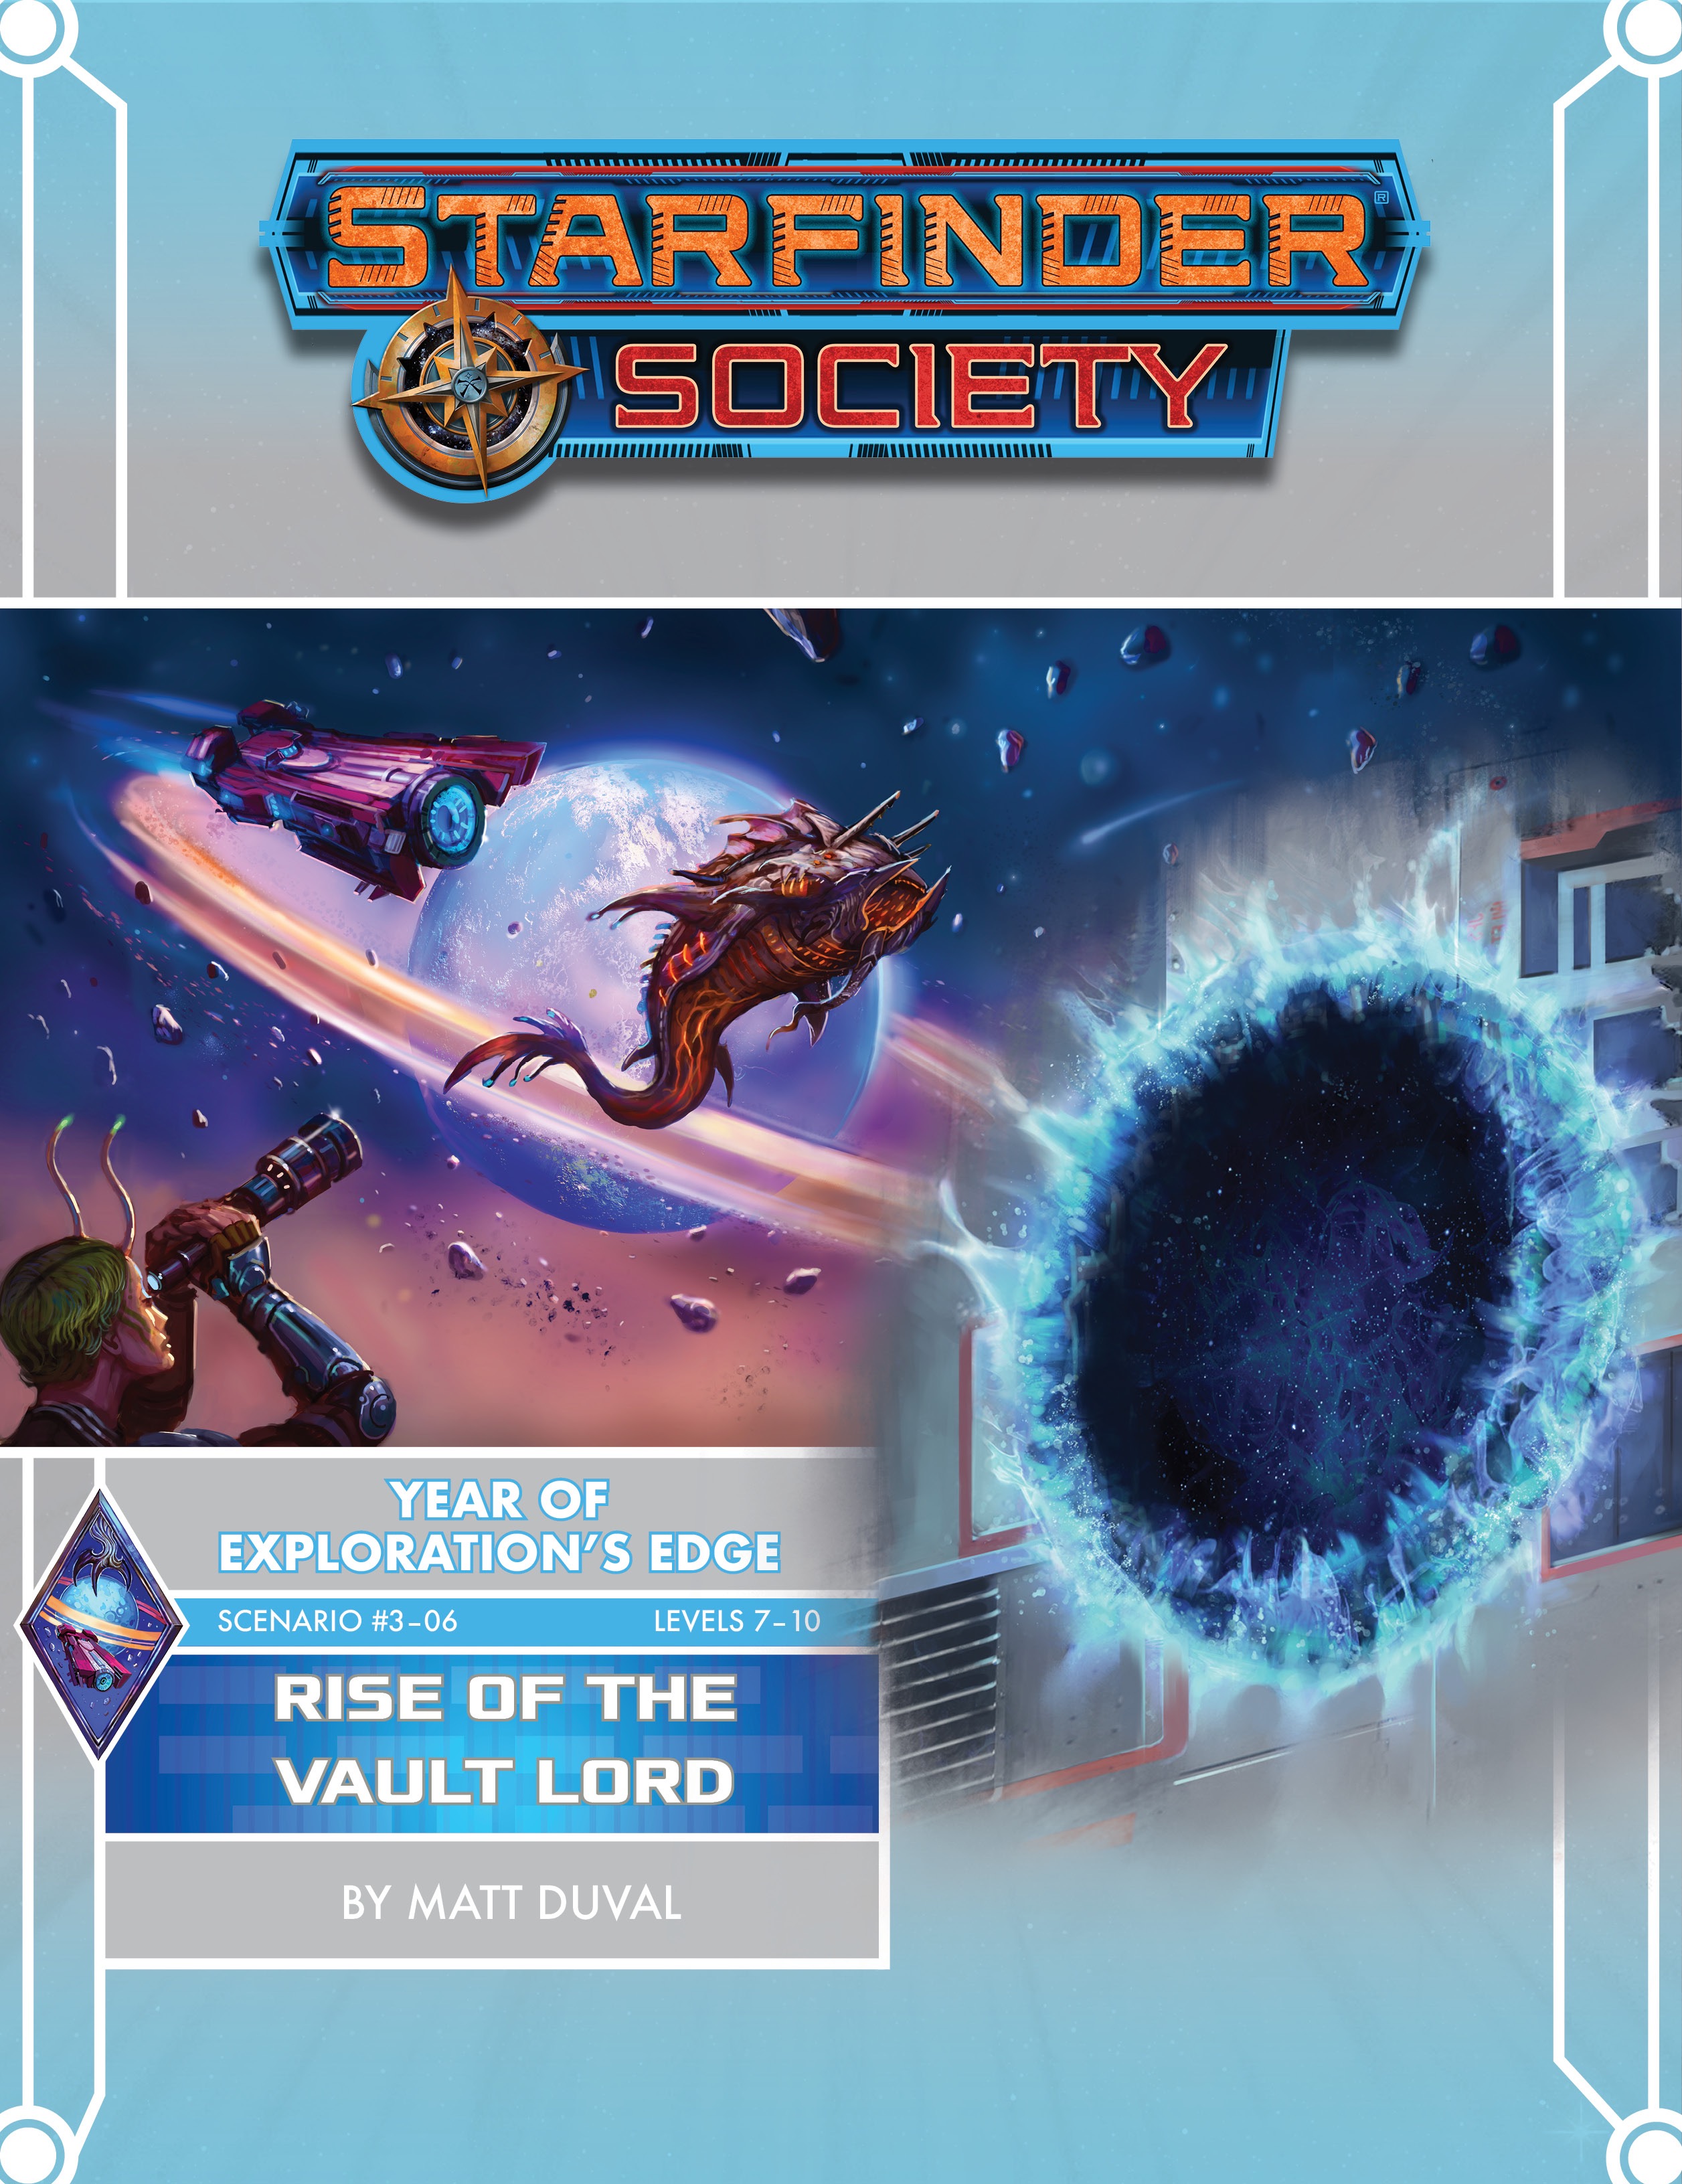 Starfinder Society Year of Exploration's Edge: a dark hole of blue energy over the image of a ringed planted in space